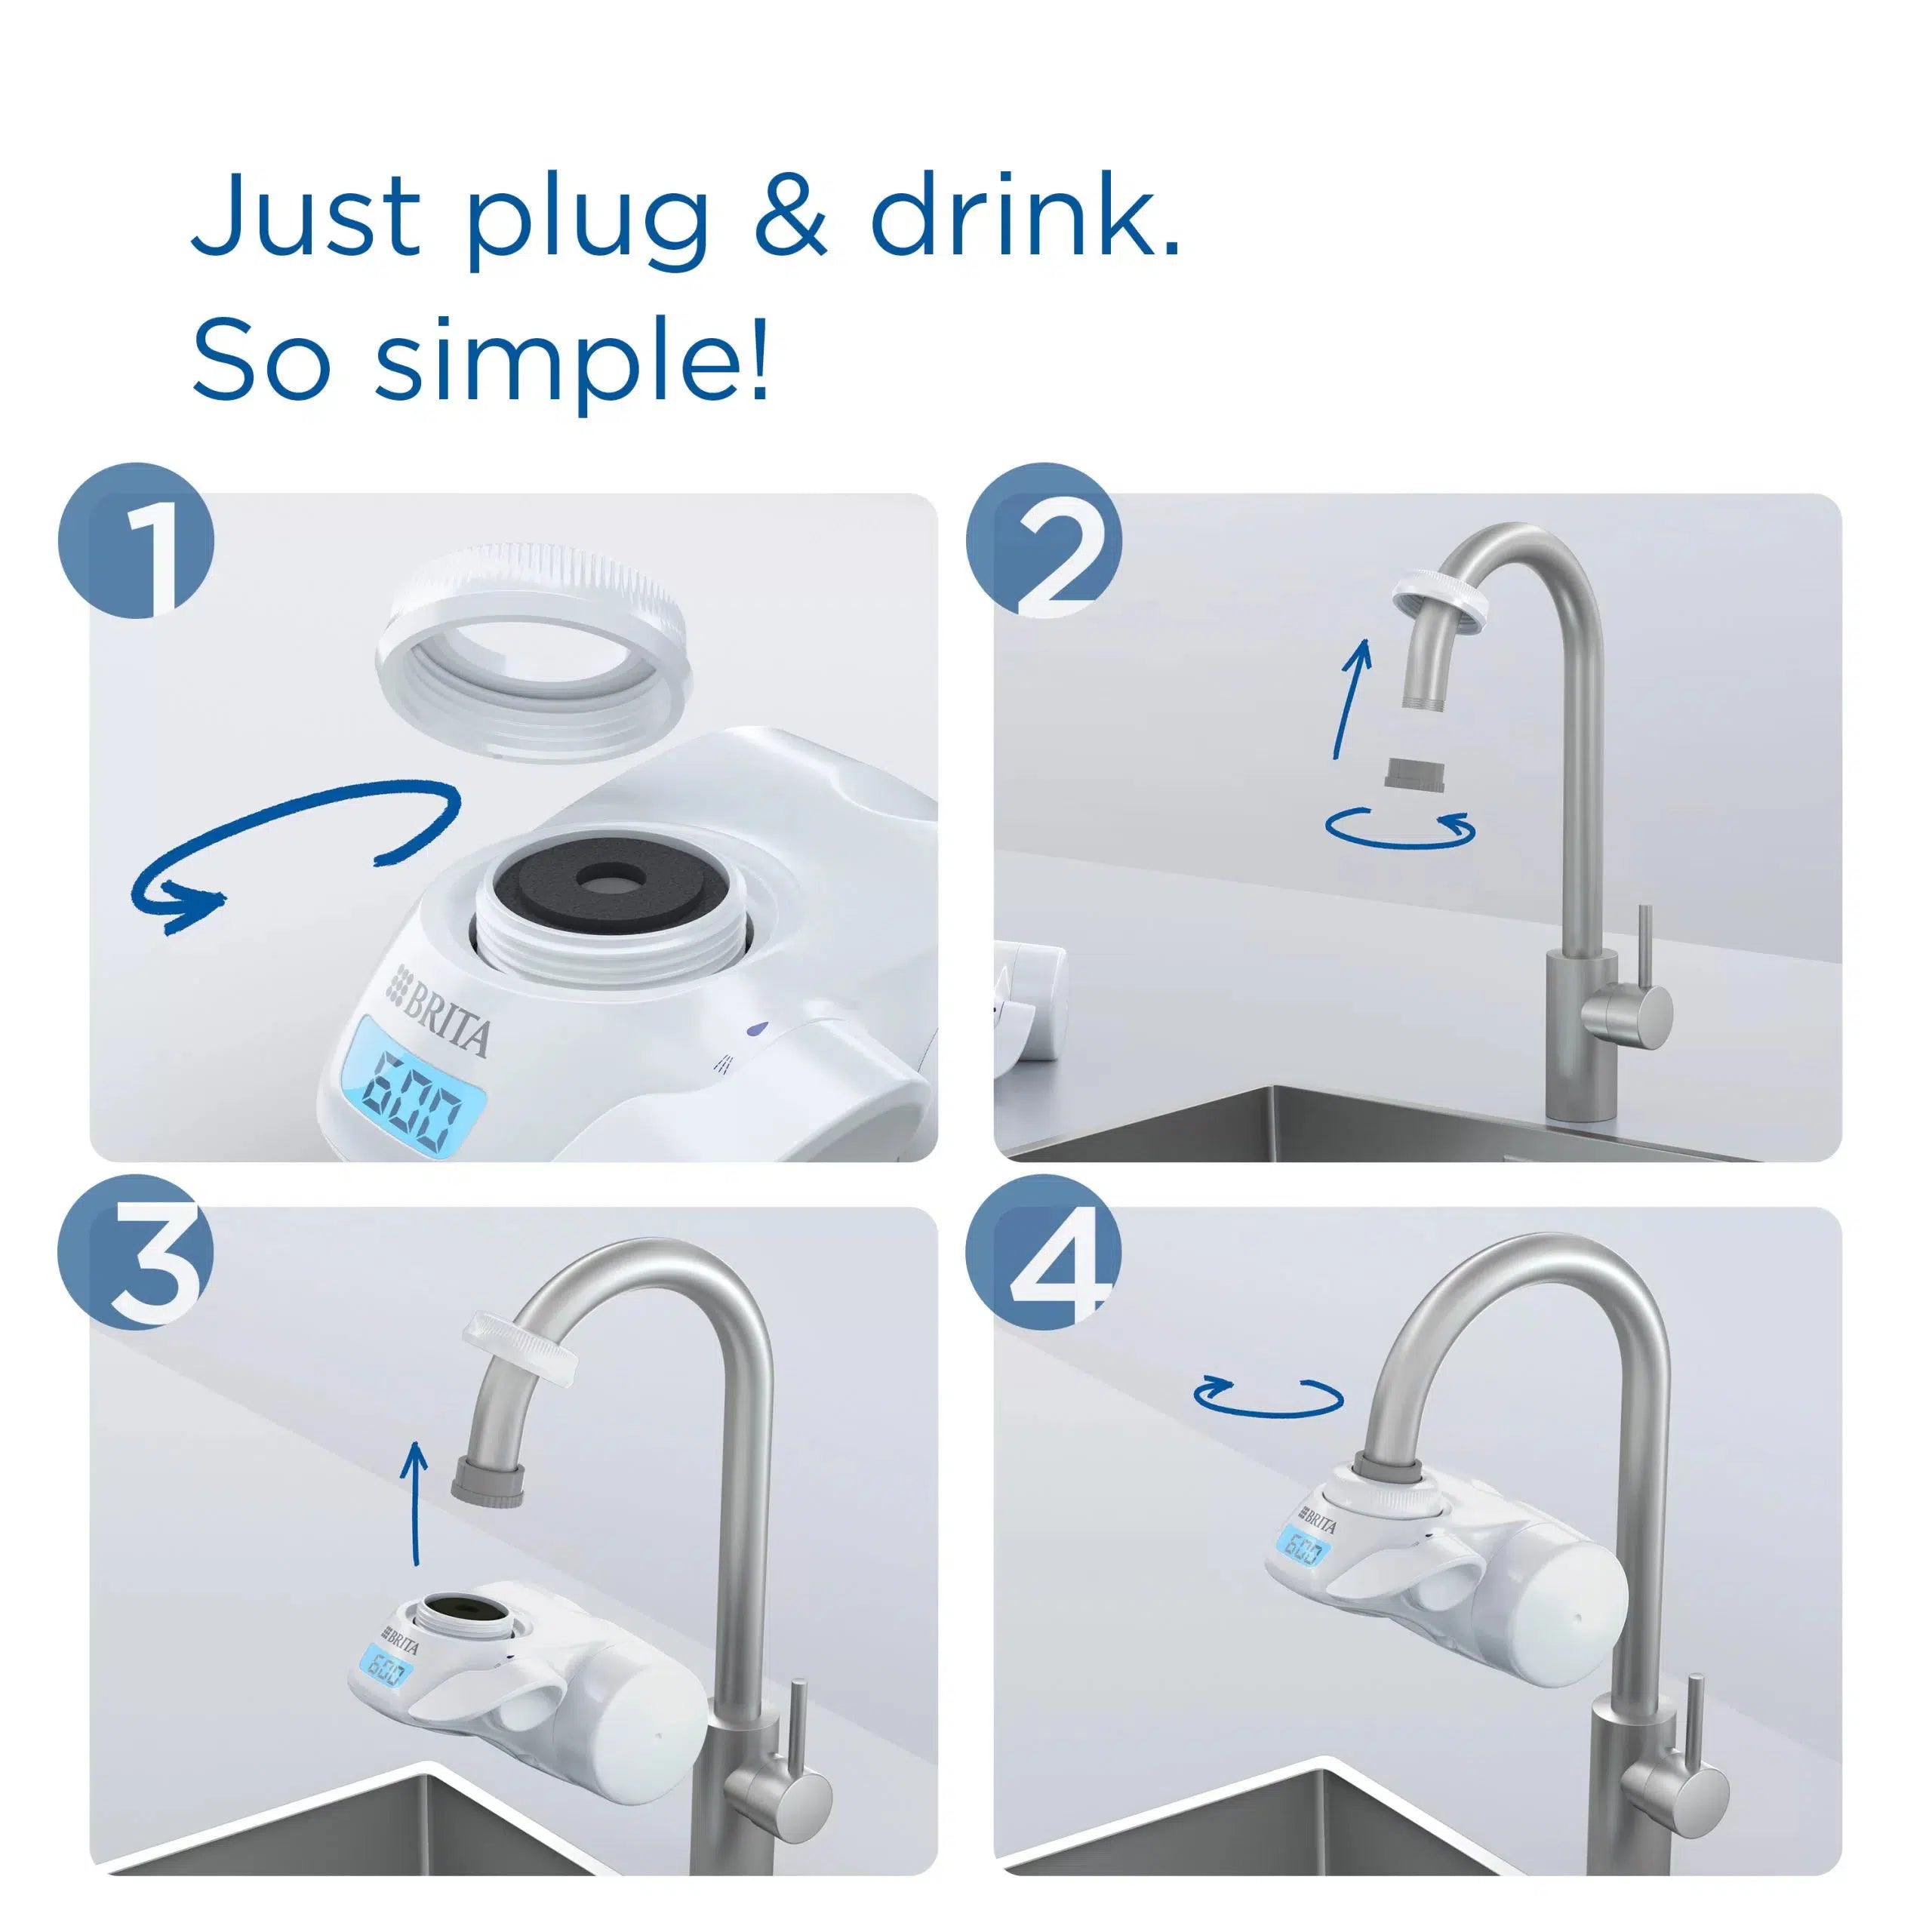 Brita On Tap Pro V-MF Water Filtration System - delivers better-tasting water with a simple one-click installation